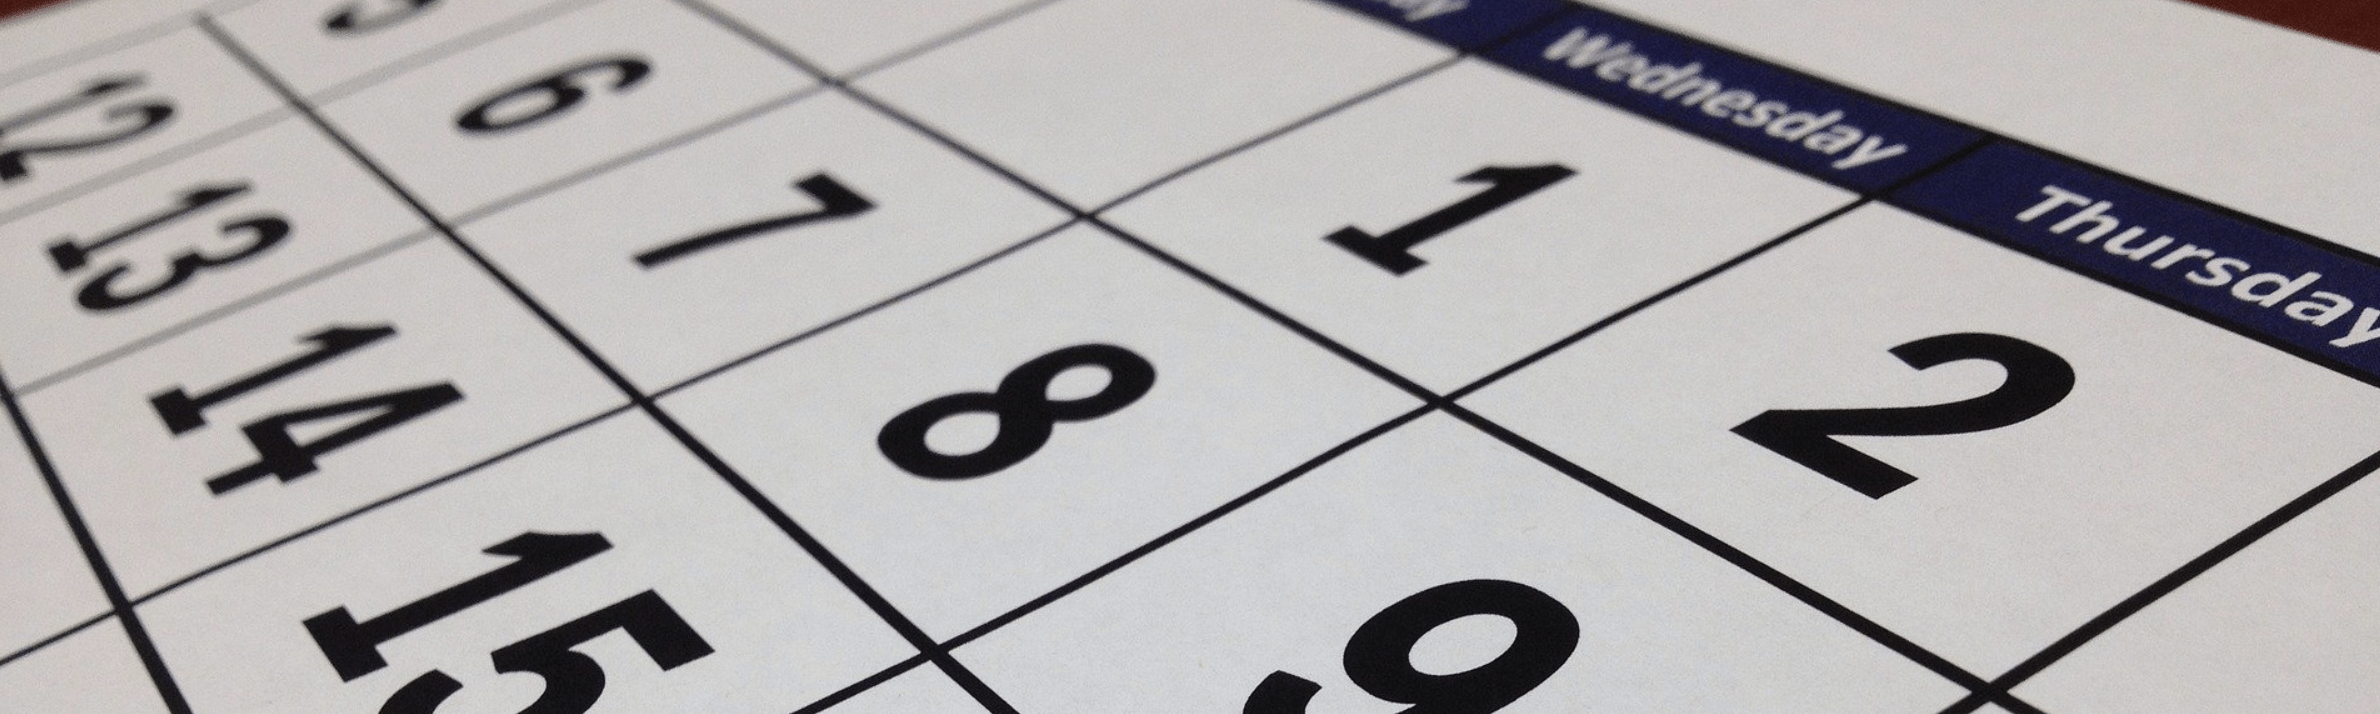 A Callender With Dates on a Sheet